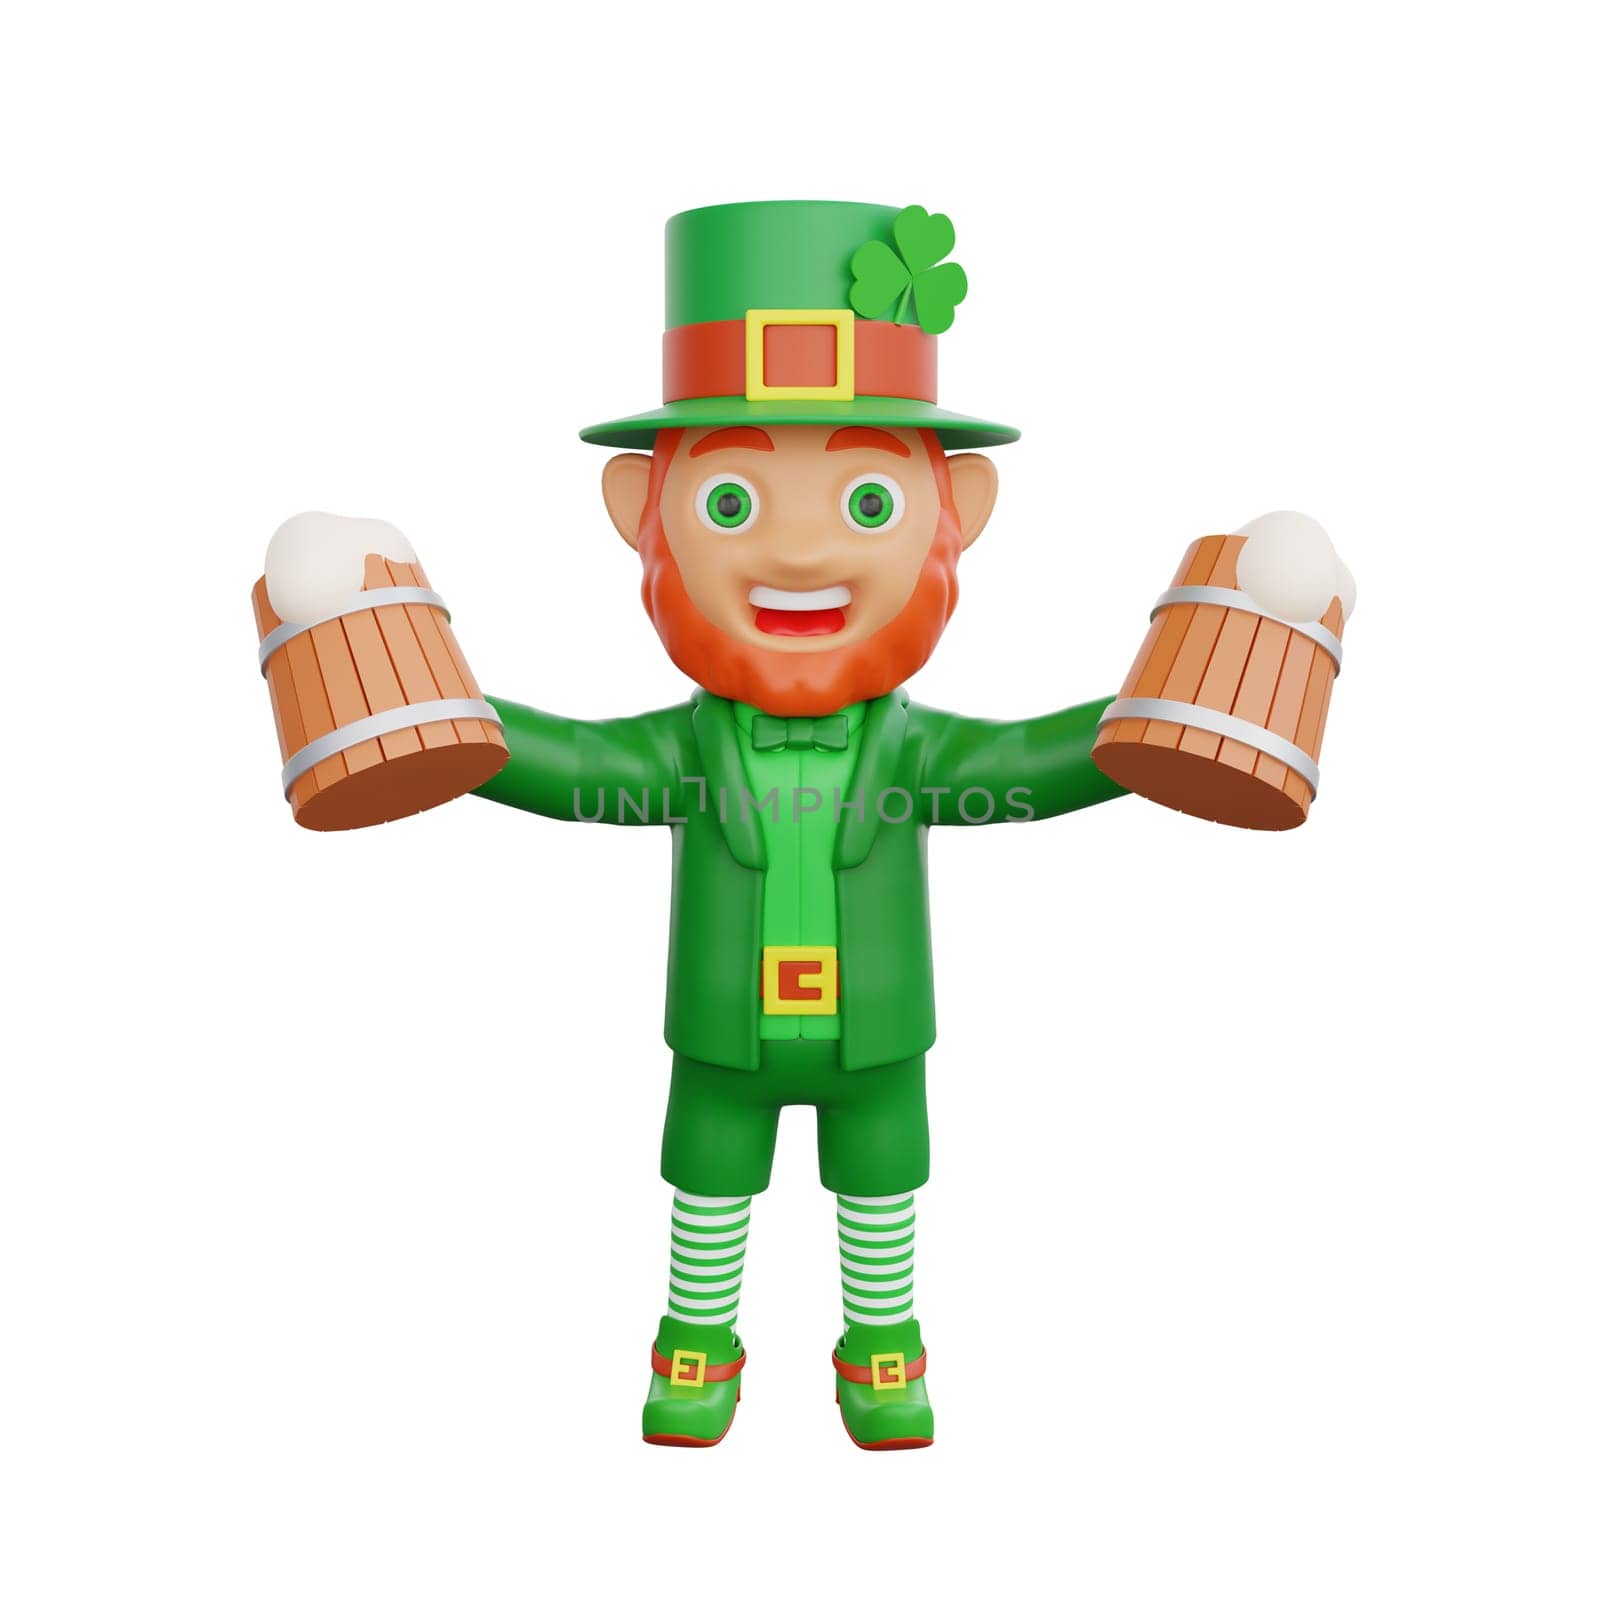 3D illustration of St. Patrick's Day character leprechaun holding two wooden mugs of beer by Rahmat_Djayusman